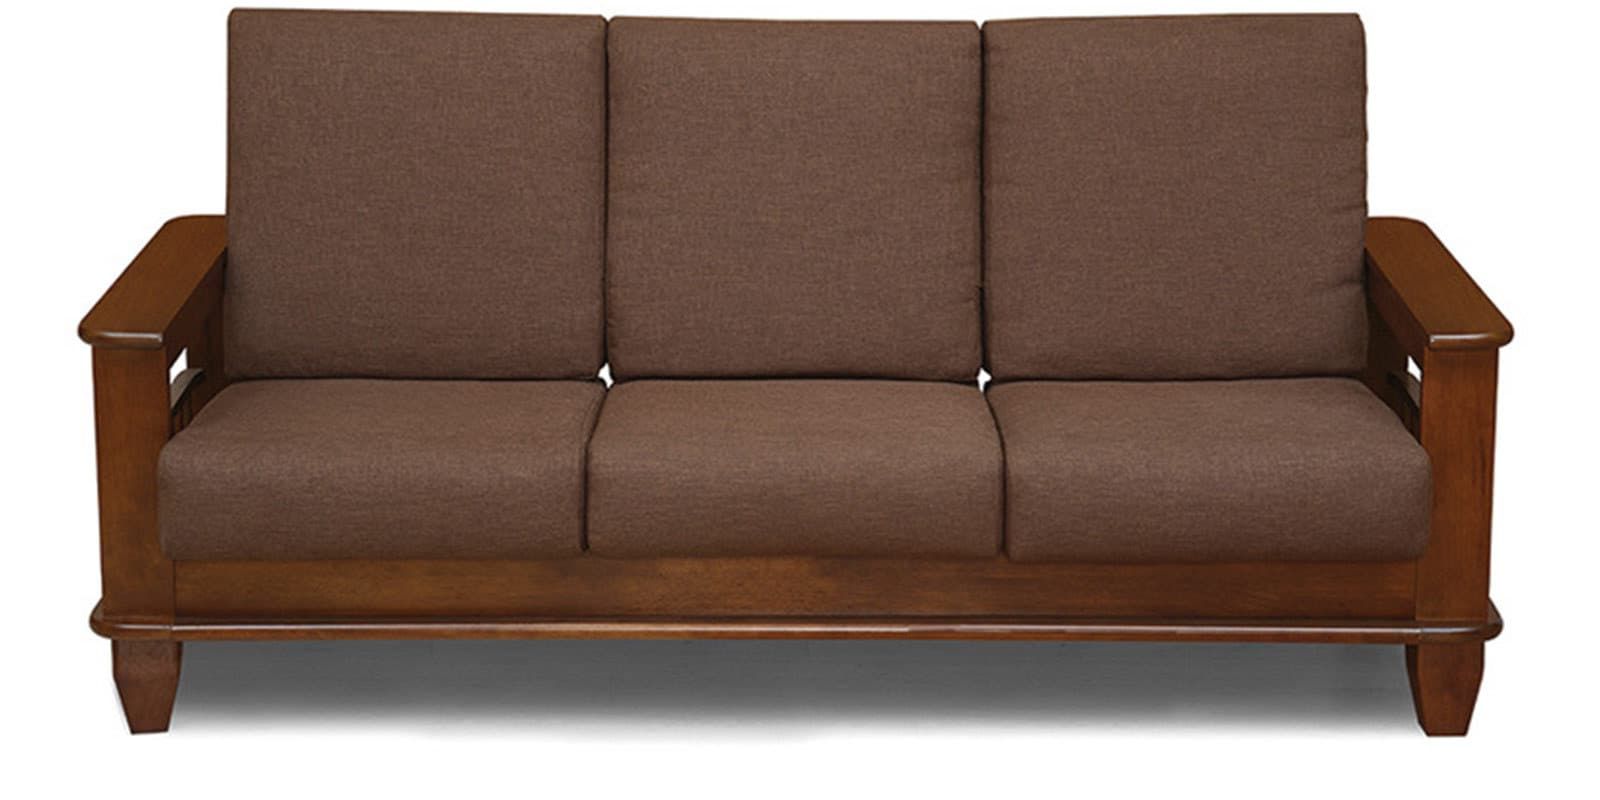 Trendy Traditional 3 Seater Sofas Within Buy @home Elena Three Seater Sofa Online – Traditional 3 Seater Sofas (View 12 of 15)